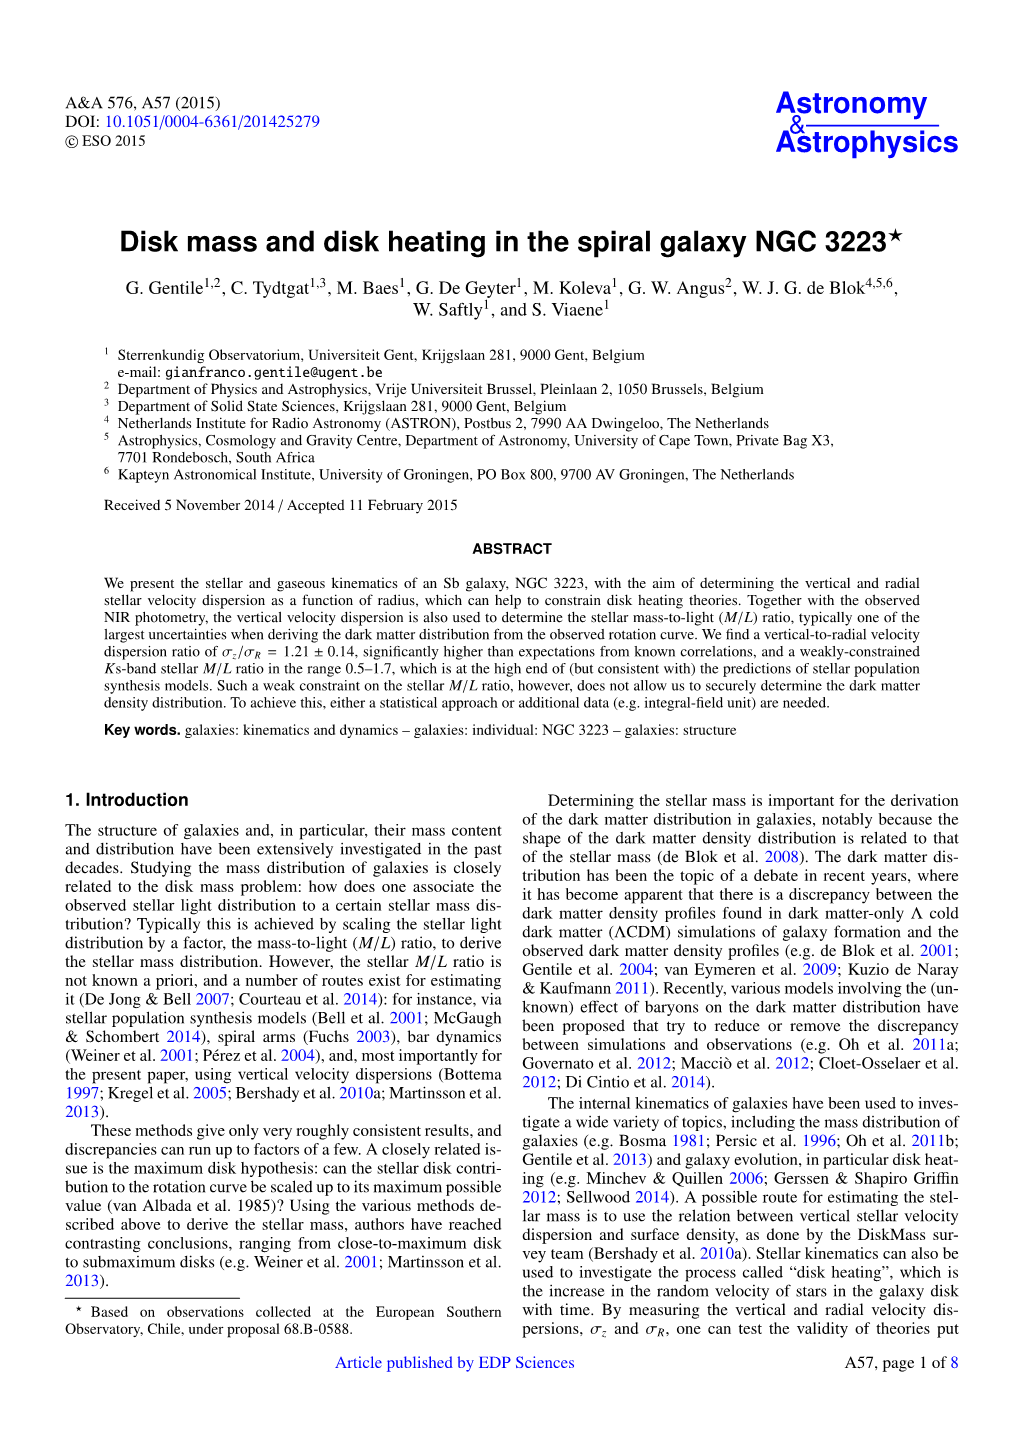 Disk Mass and Disk Heating in the Spiral Galaxy NGC 3223?